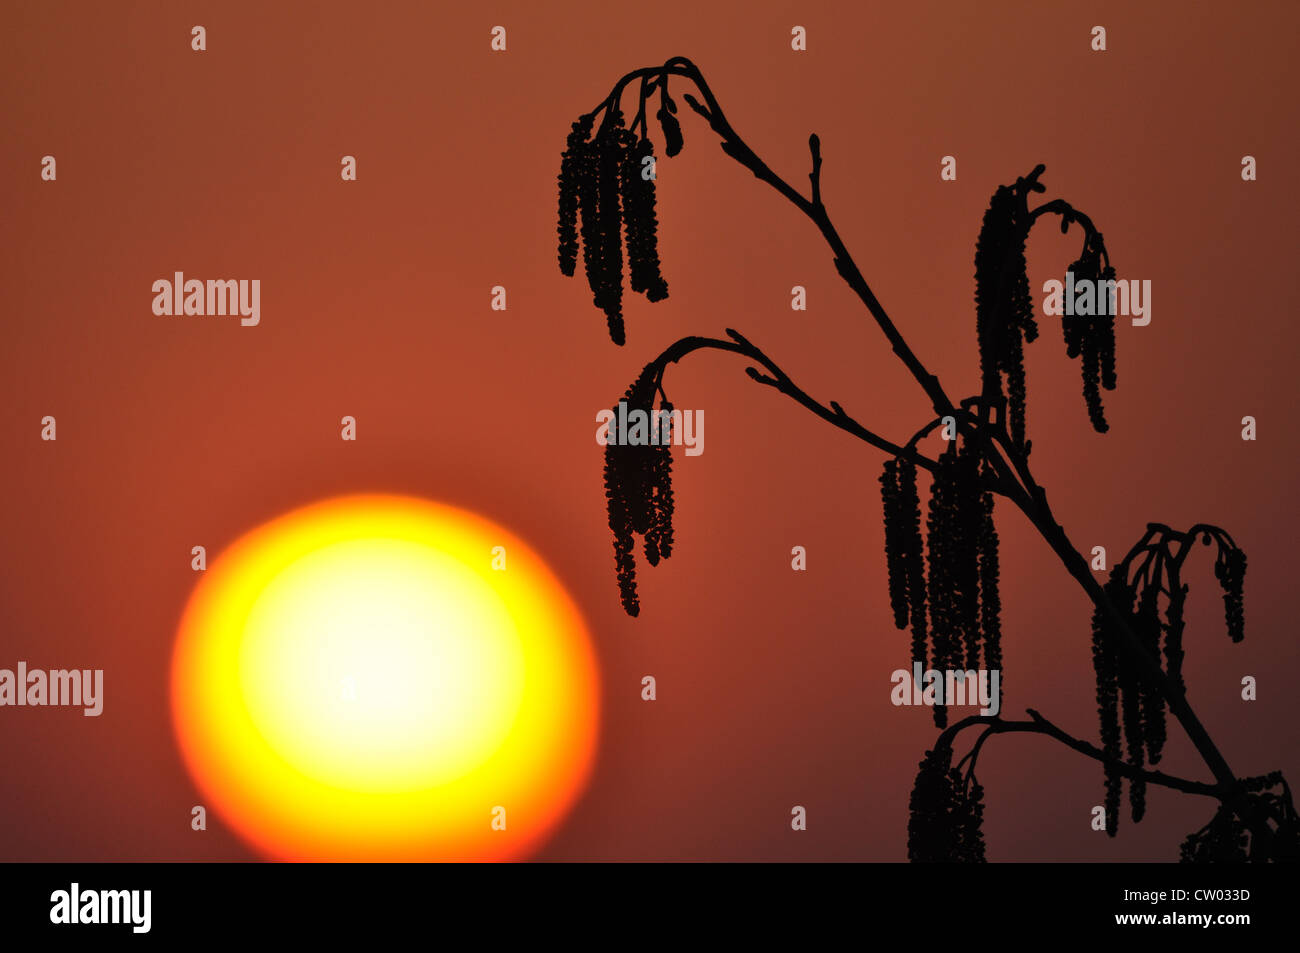 The Sun setting behind a Catkin stalk Stock Photo